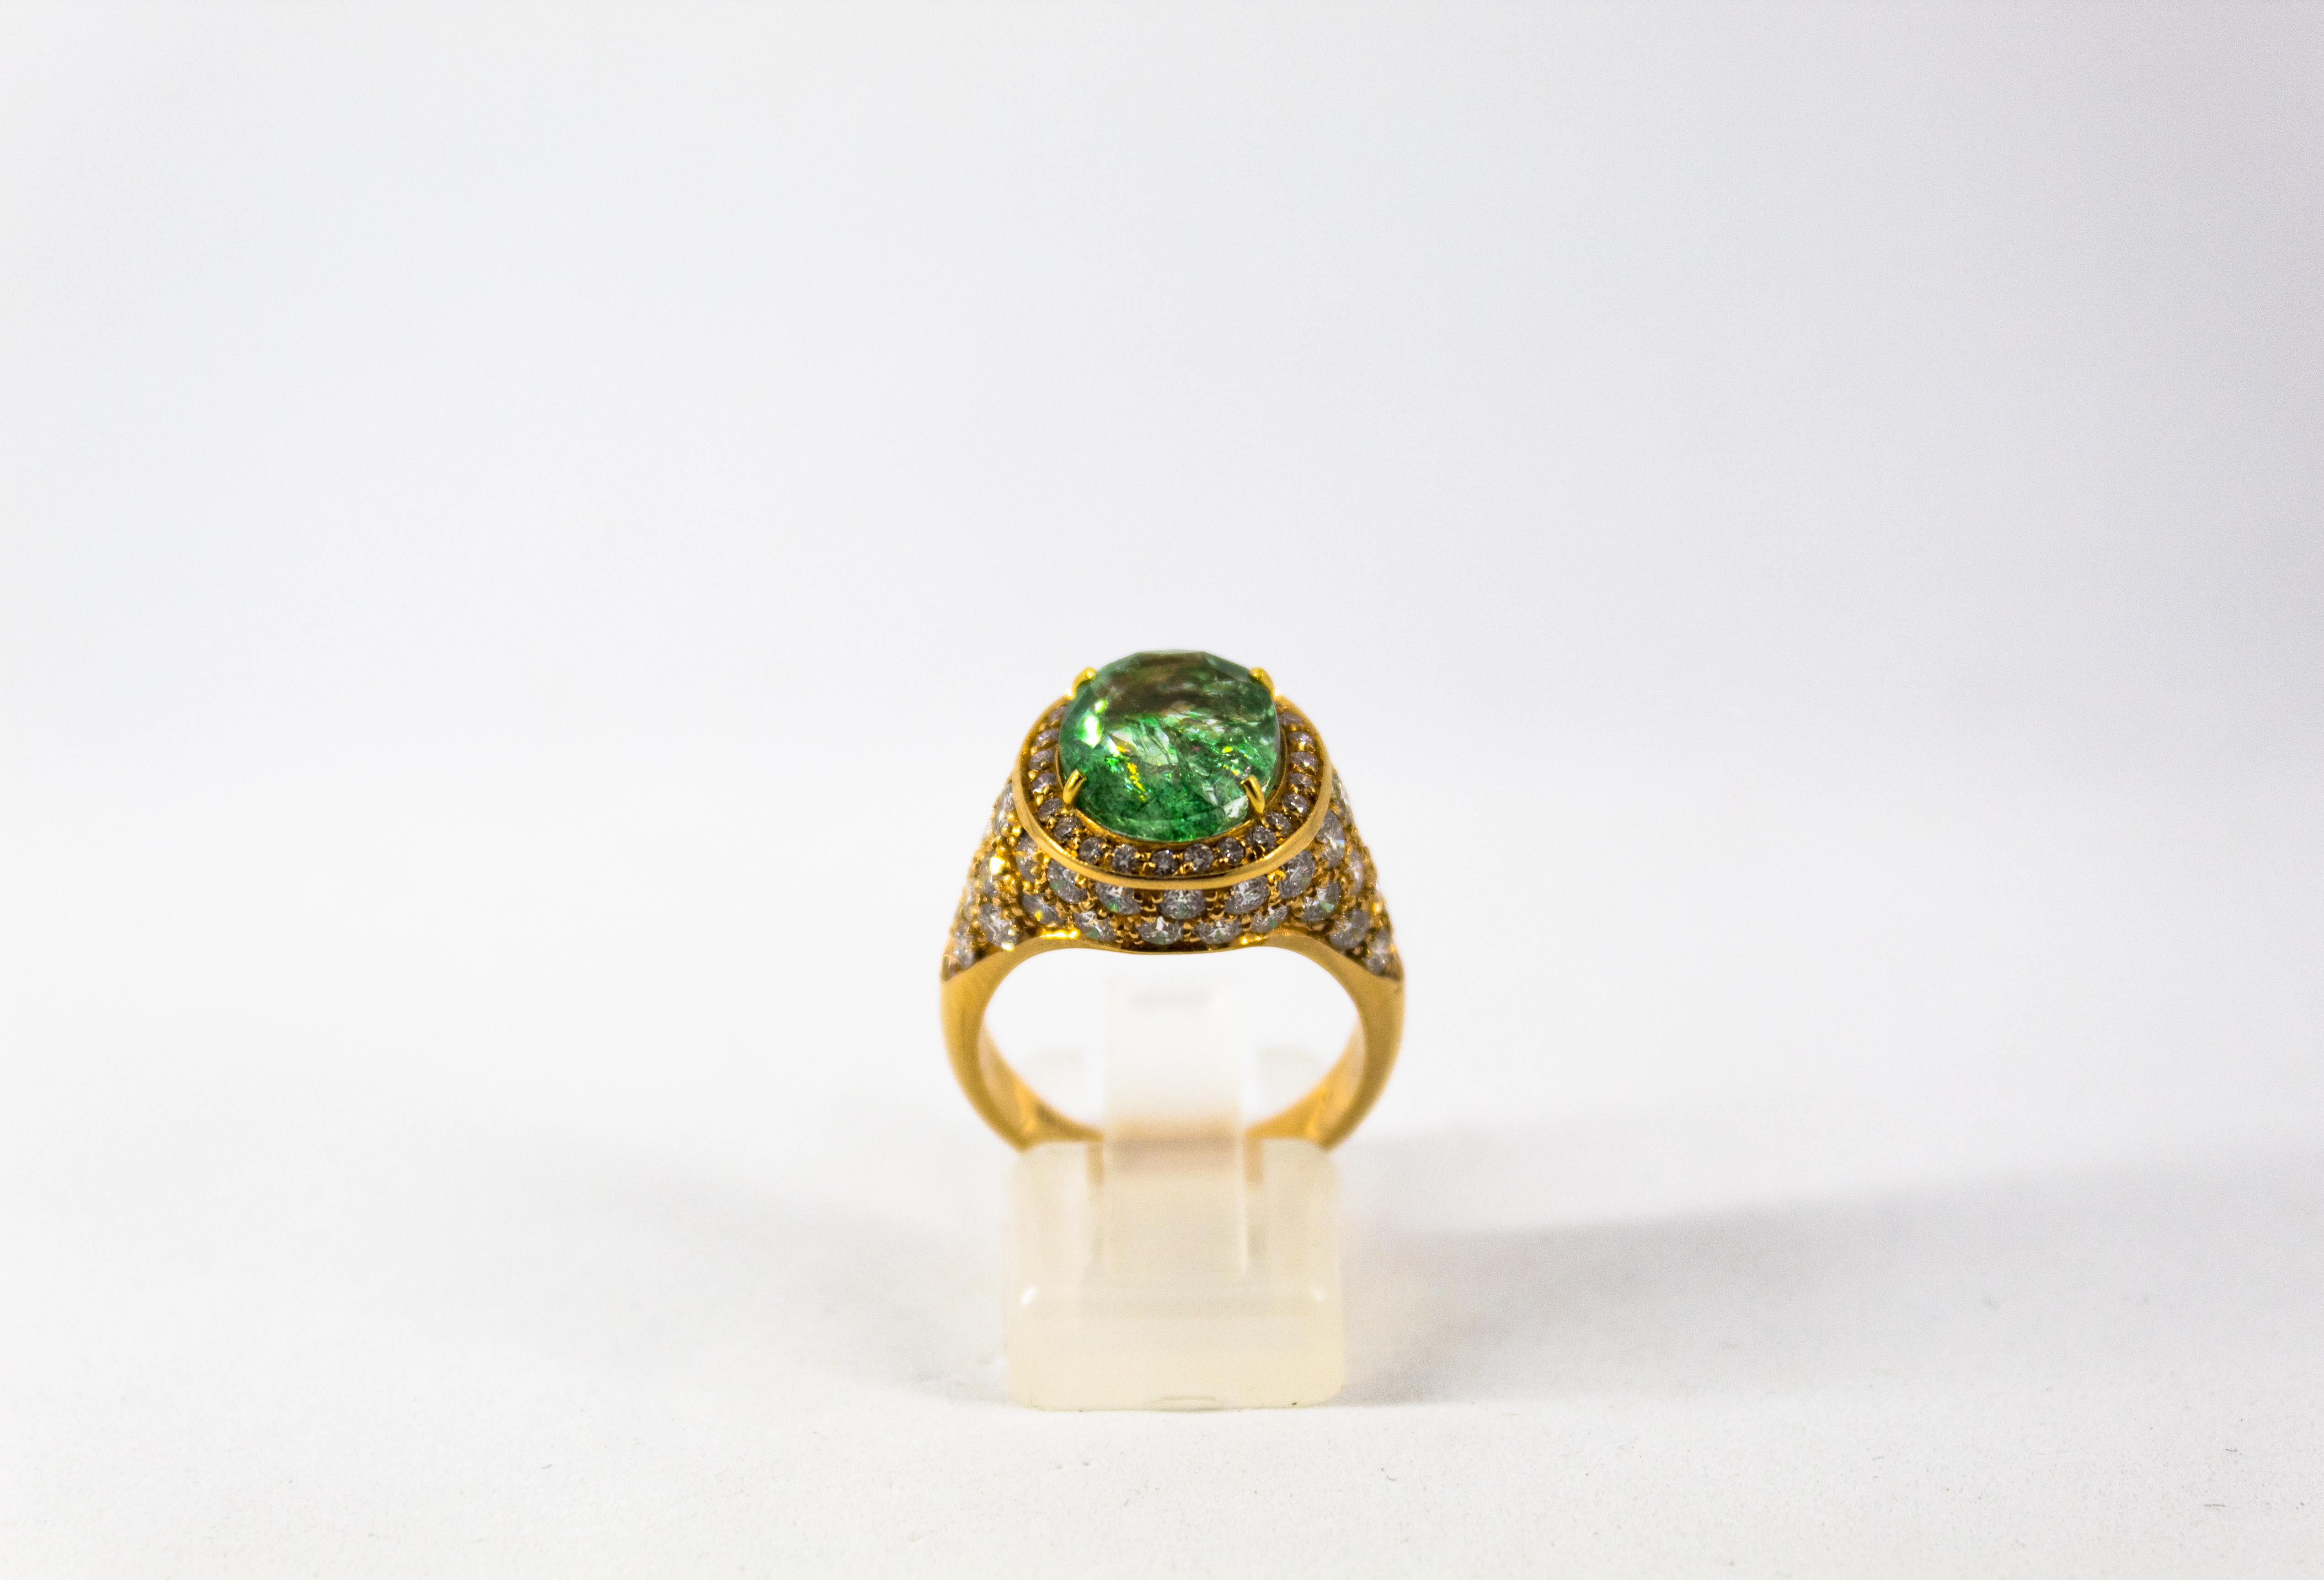 This Ring is made of 18K Yellow Gold.
This Ring has 2.05 Carats of White Diamonds.
This Ring has a 4.45 Carats Emerald.
This Ring is available also with Black Diamonds and a Blue Sapphire.
Size ITA: 13 USA: 6.5
We're a workshop so every piece is